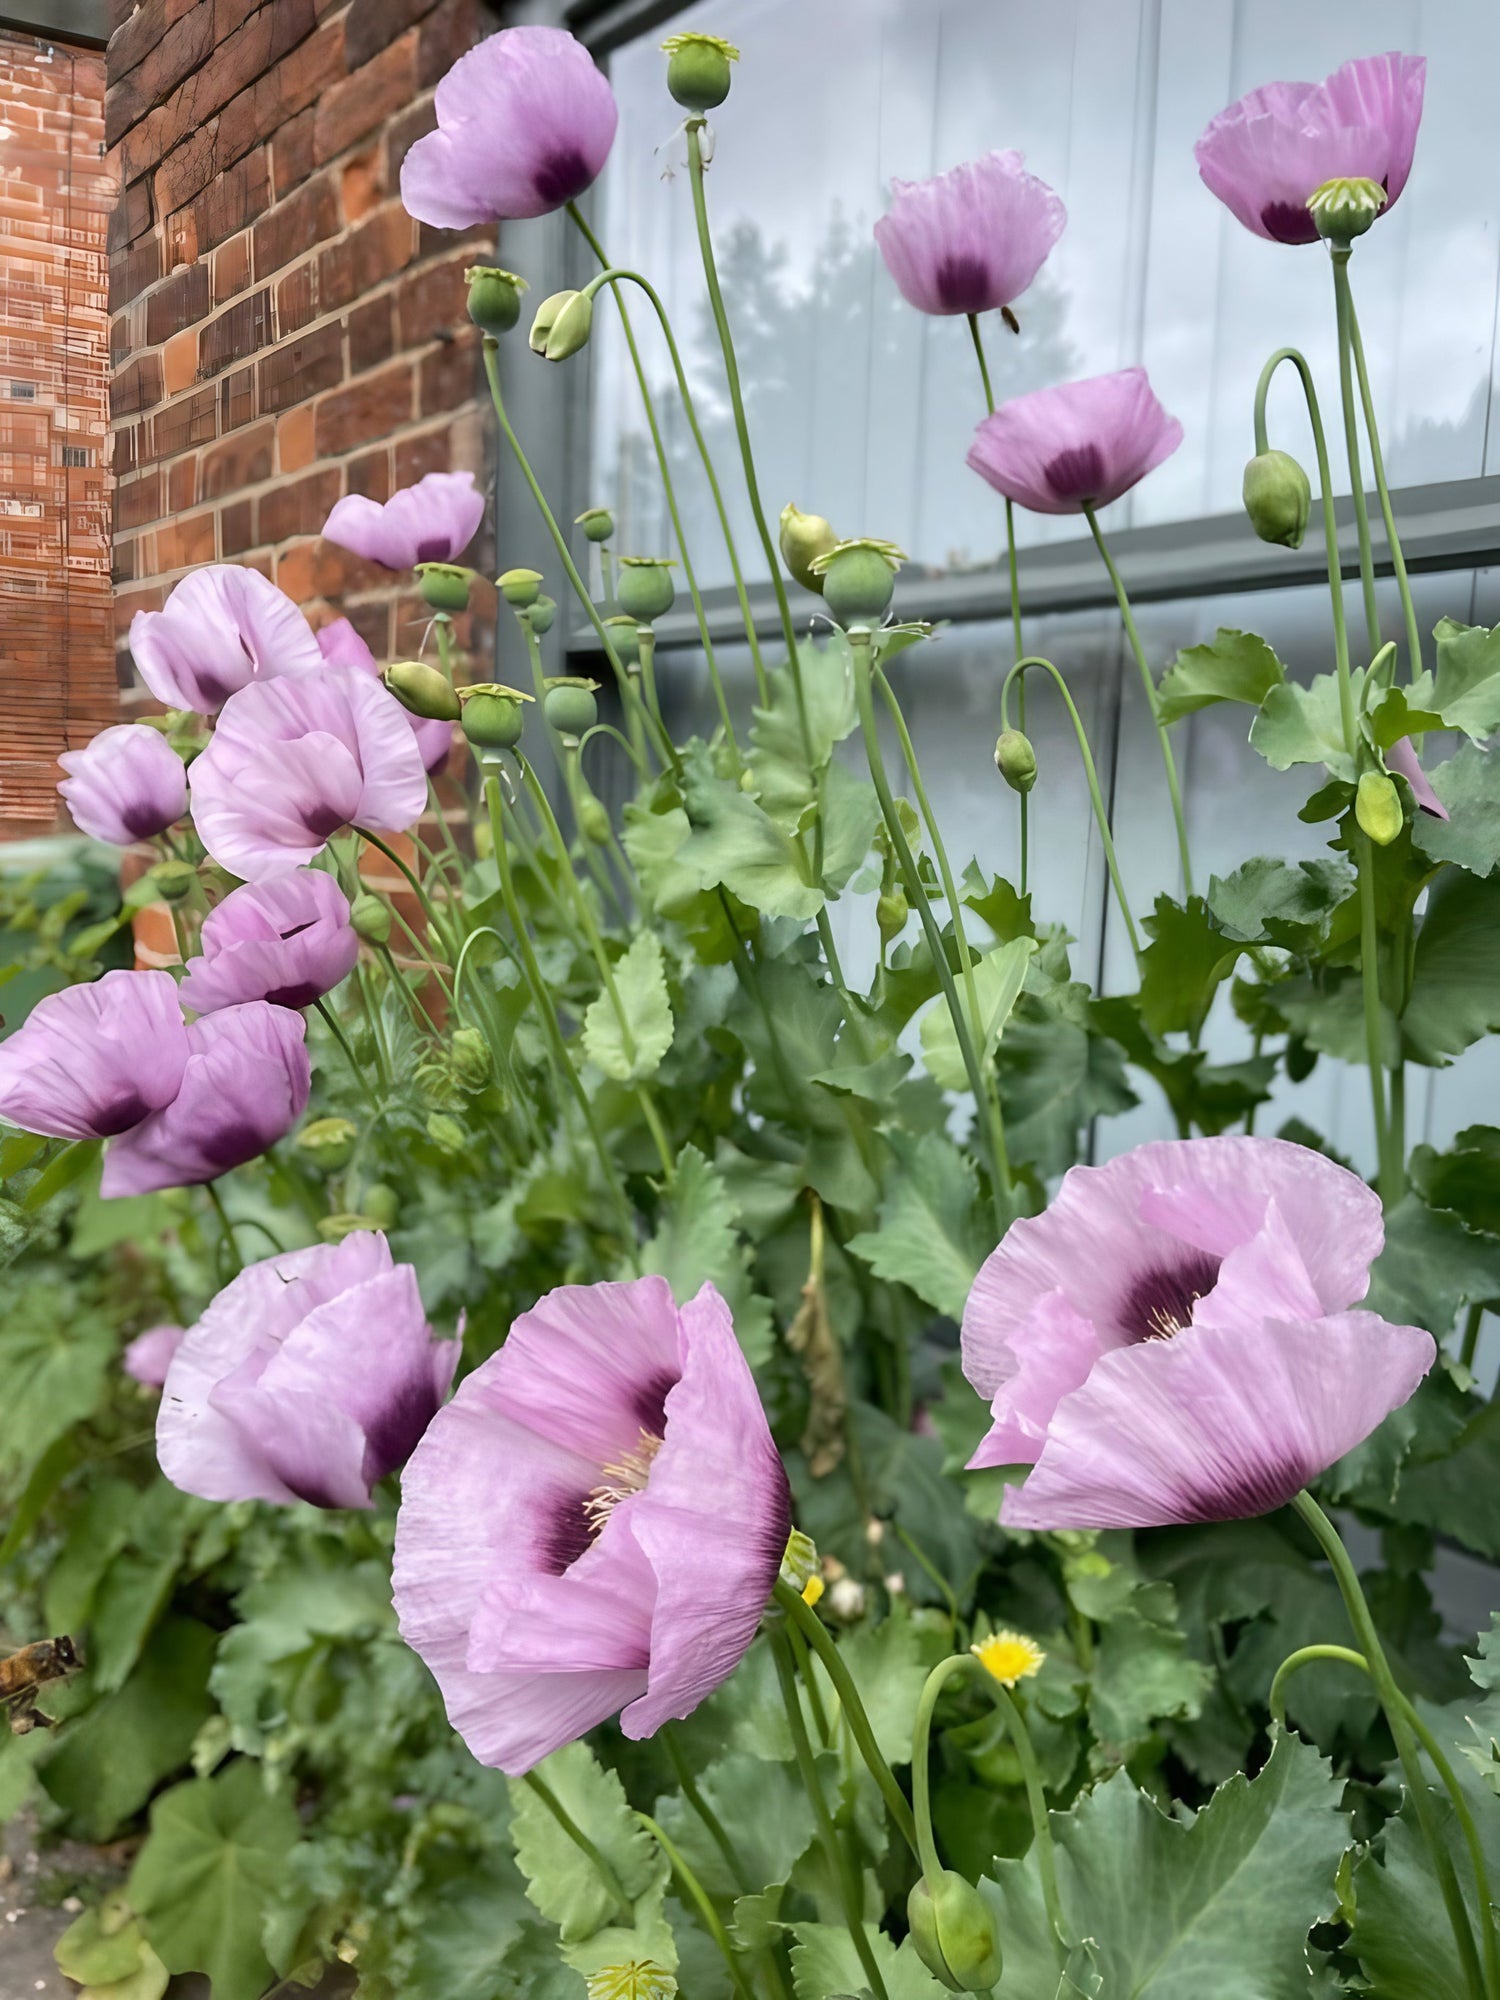 Cluster of Hungarian Blue poppies with a brick building backdrop